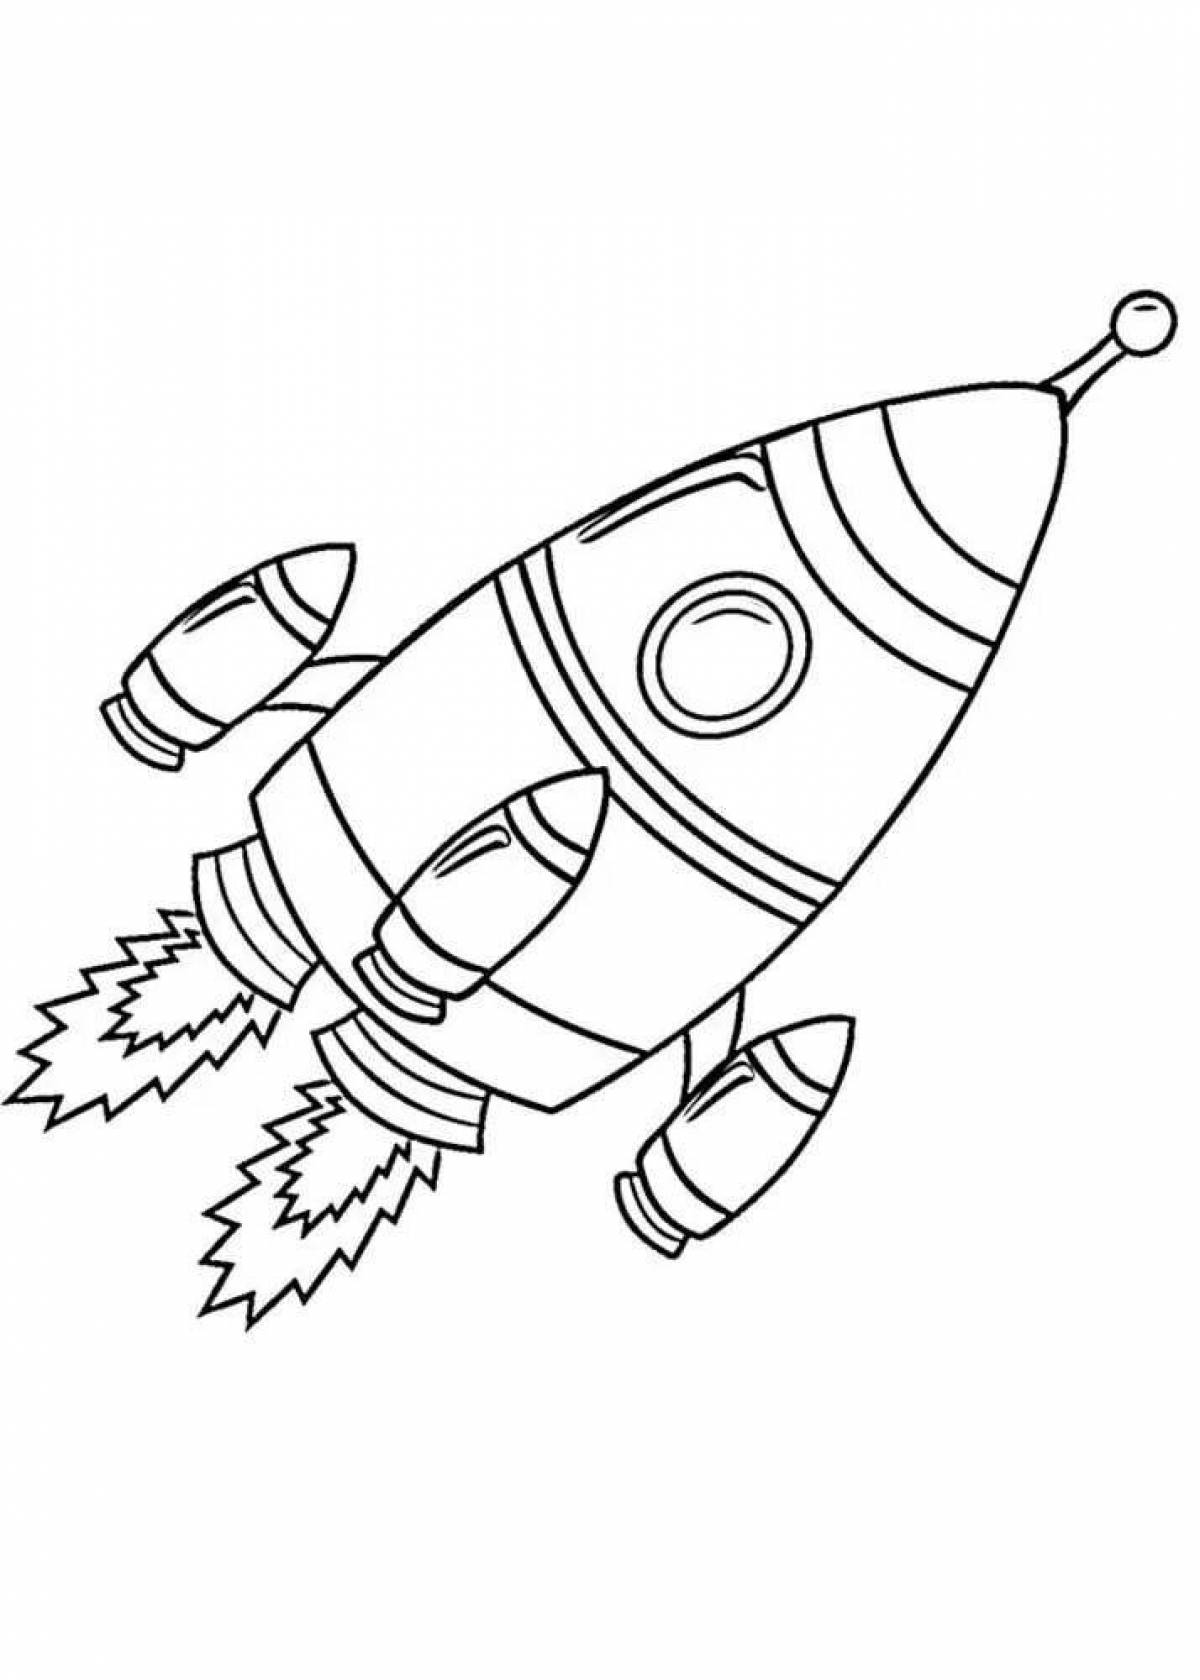 Colouring awesome rocket